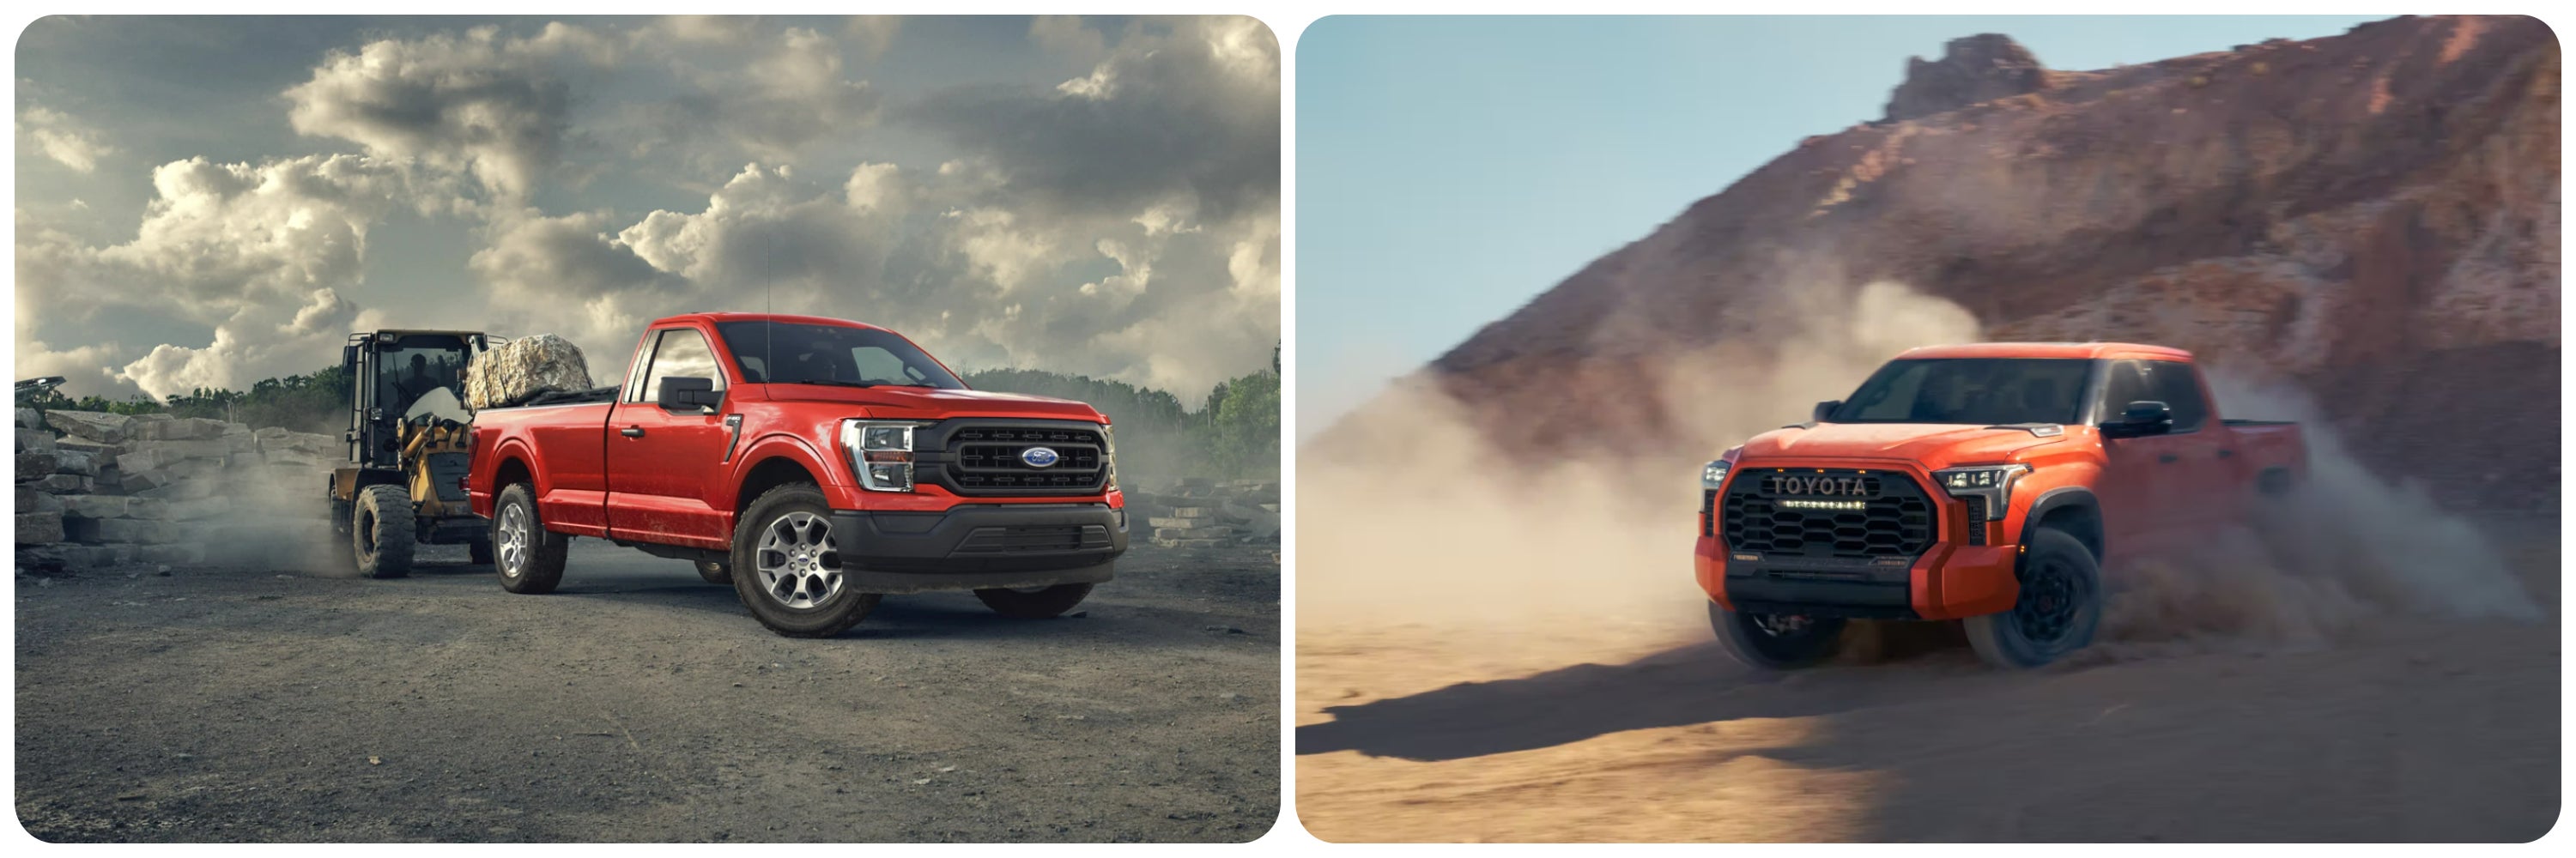 On the left a red 2023 Ford F-150 hauling construction equipment, on the right an orange 2023 Toyota Tundra spins dust into the air off-roading in the desert.